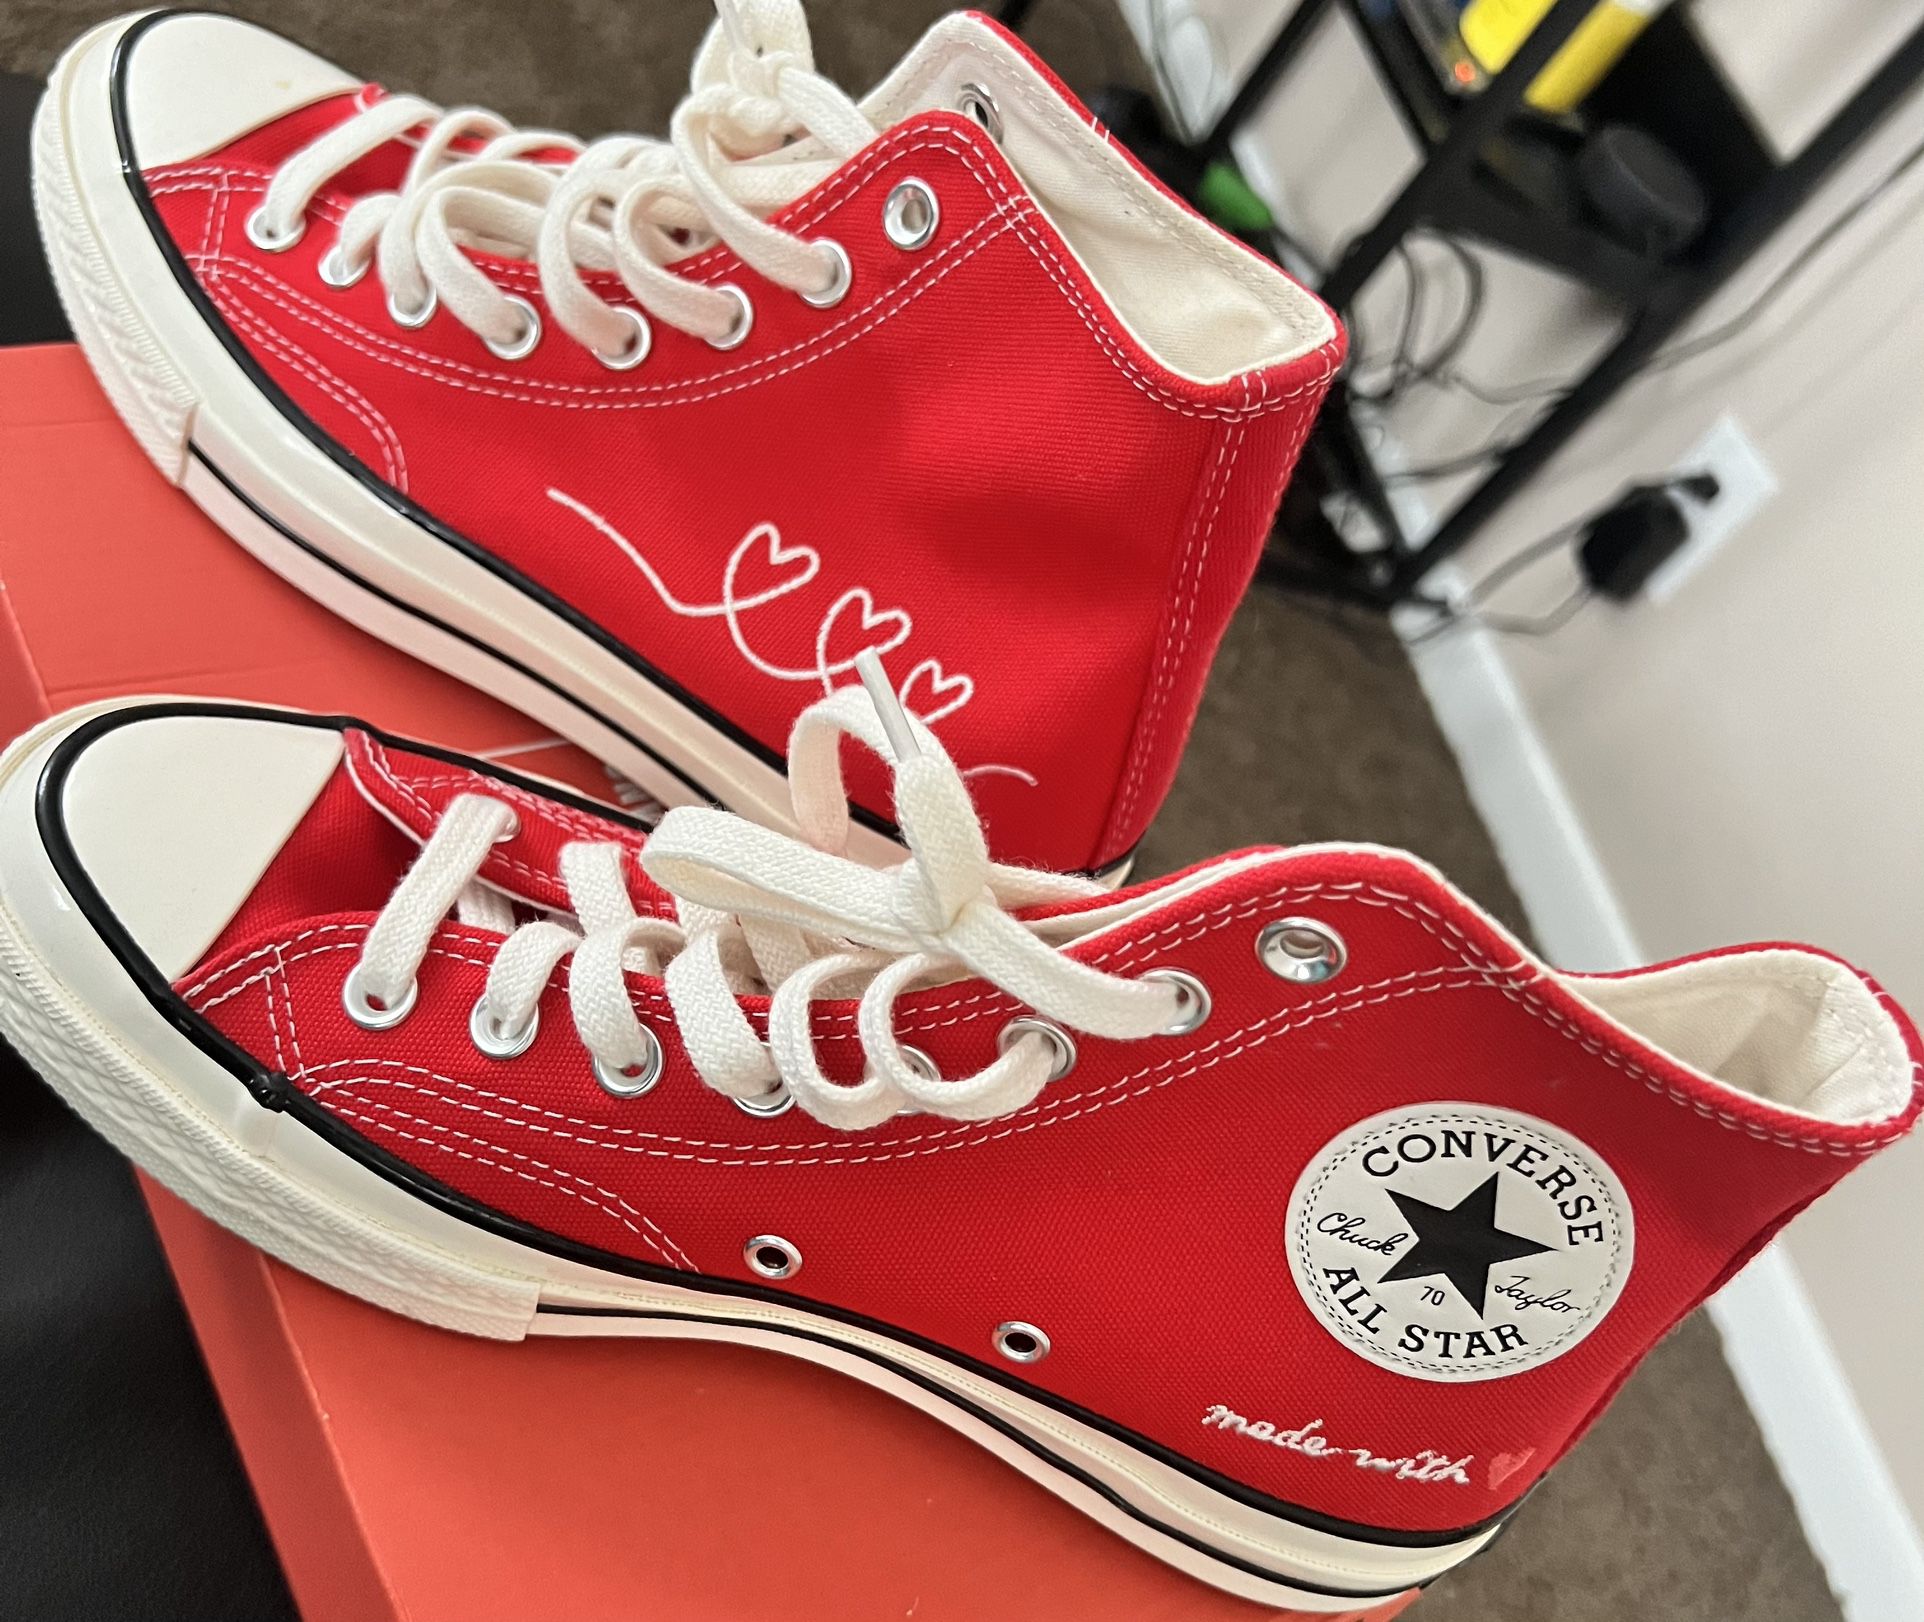 CONVERSE CHUCK 70 HI UNIVER UNIVERSITY RED/EGR “Made With ♥️”